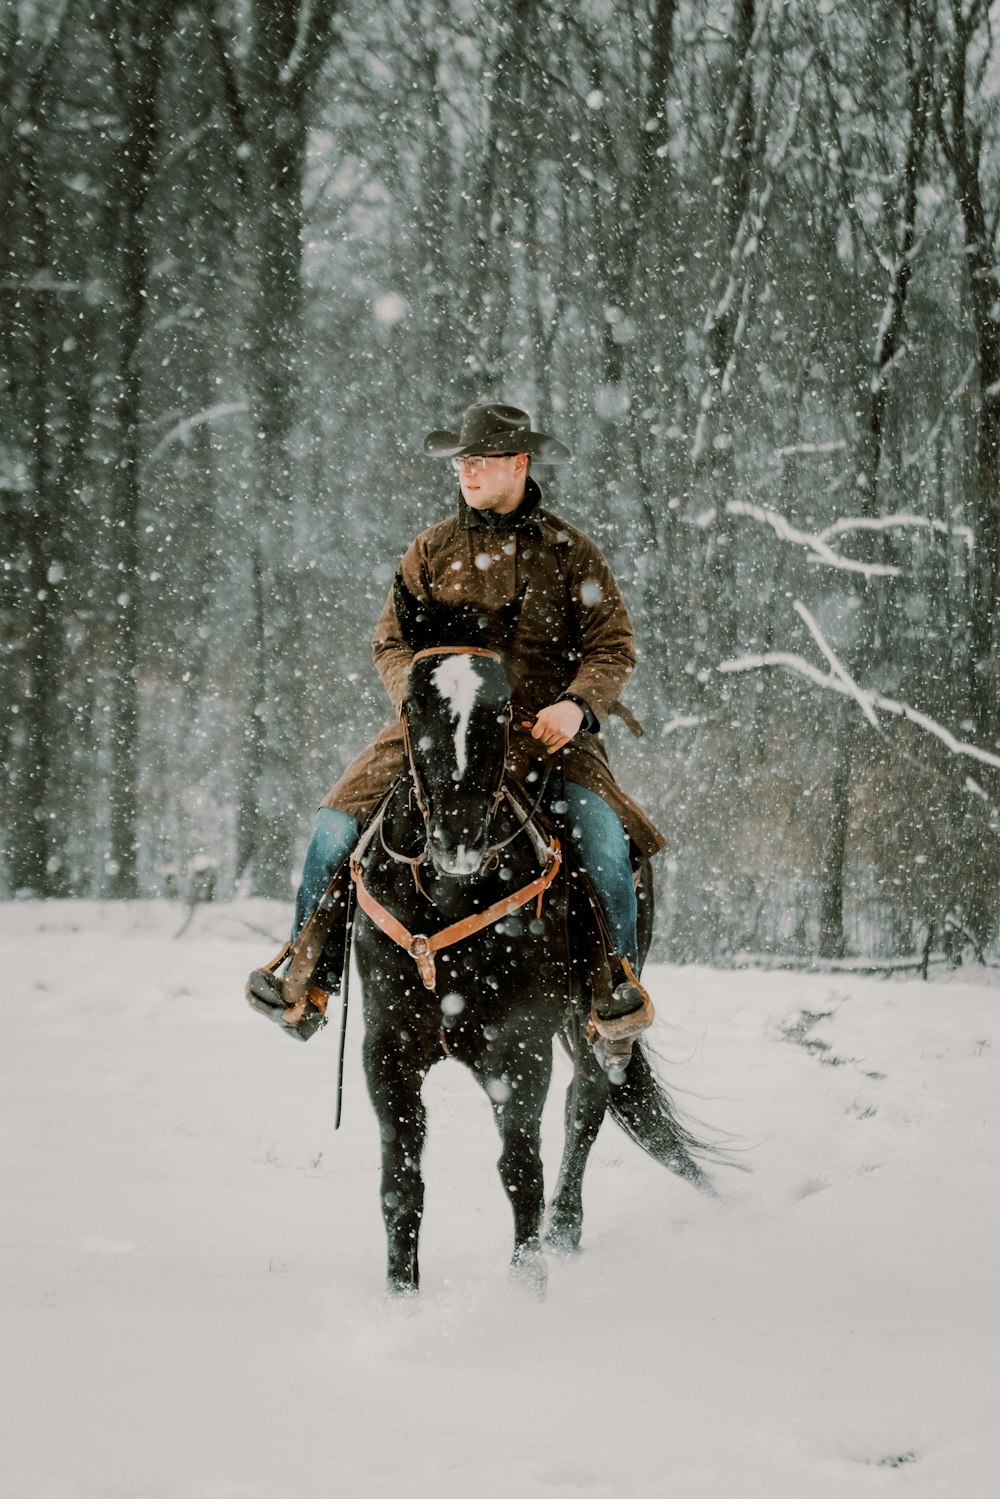 a man riding on the back of a horse in the snow